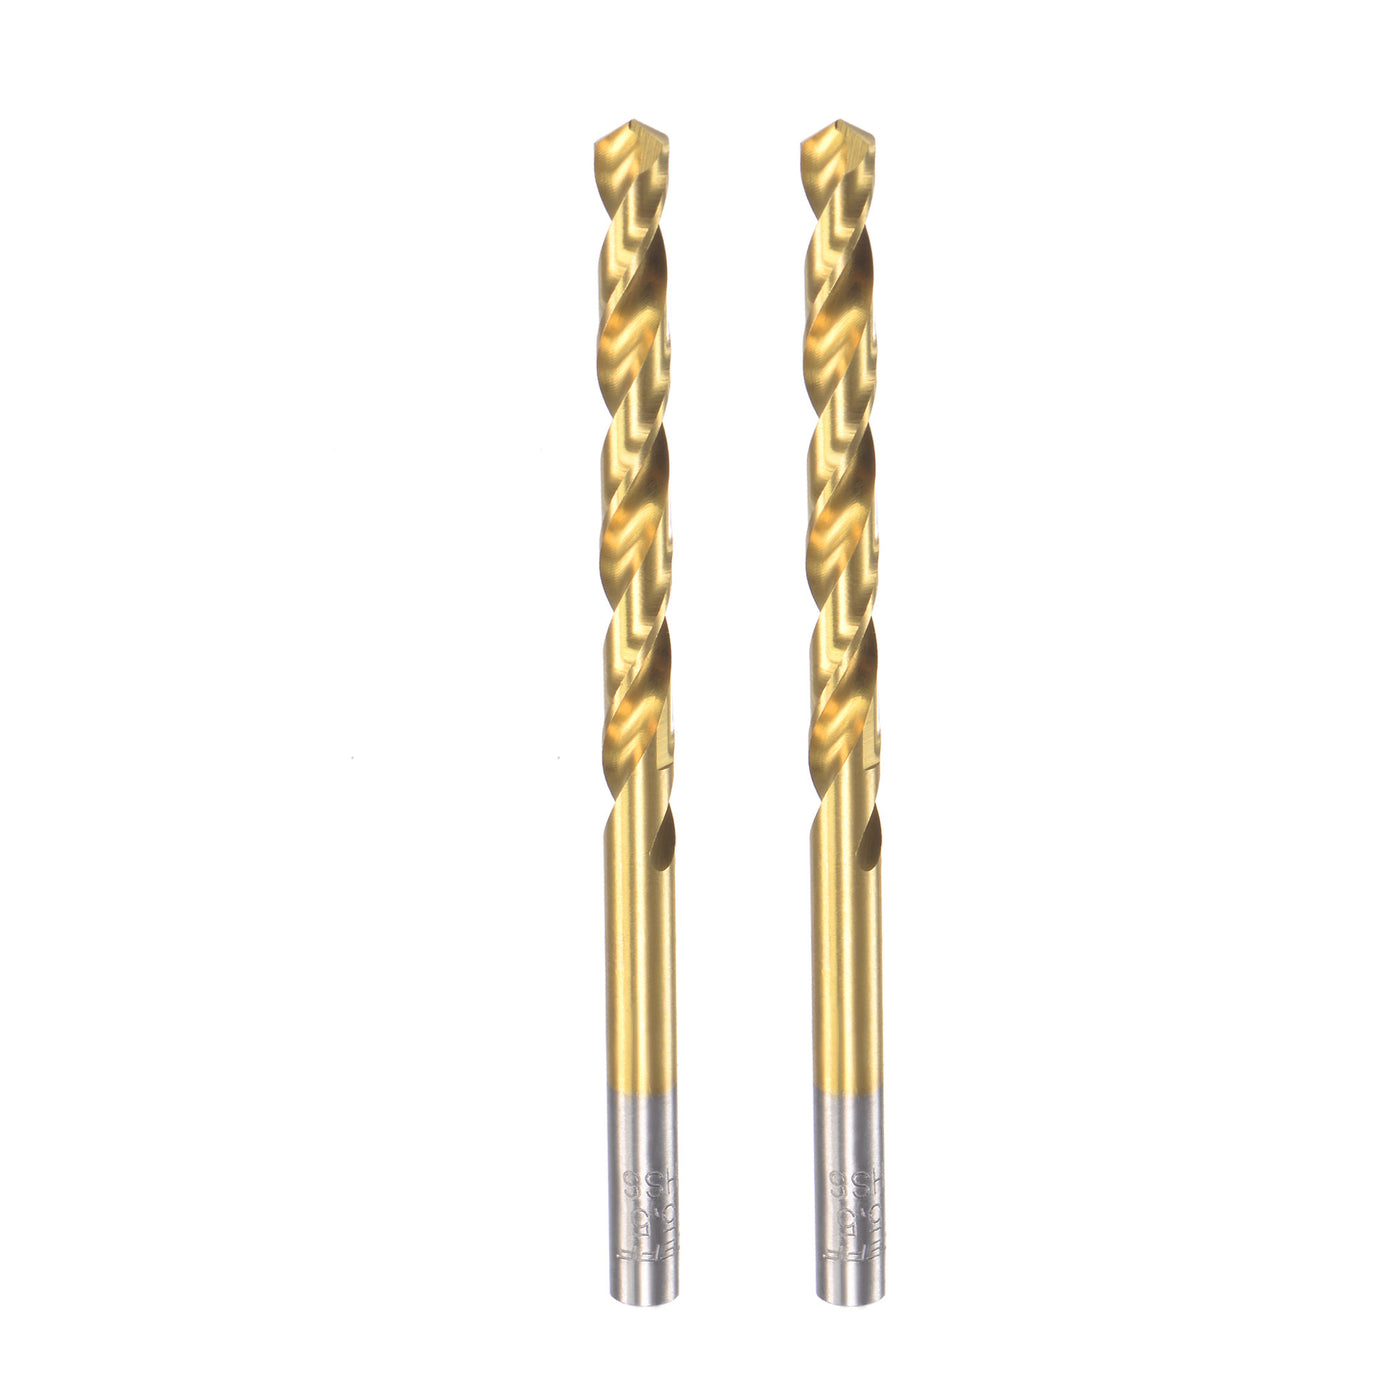 uxcell Uxcell High Speed Steel Twist Drill Bit 5.5mm Fully Ground Titanium Coated 2 Pcs